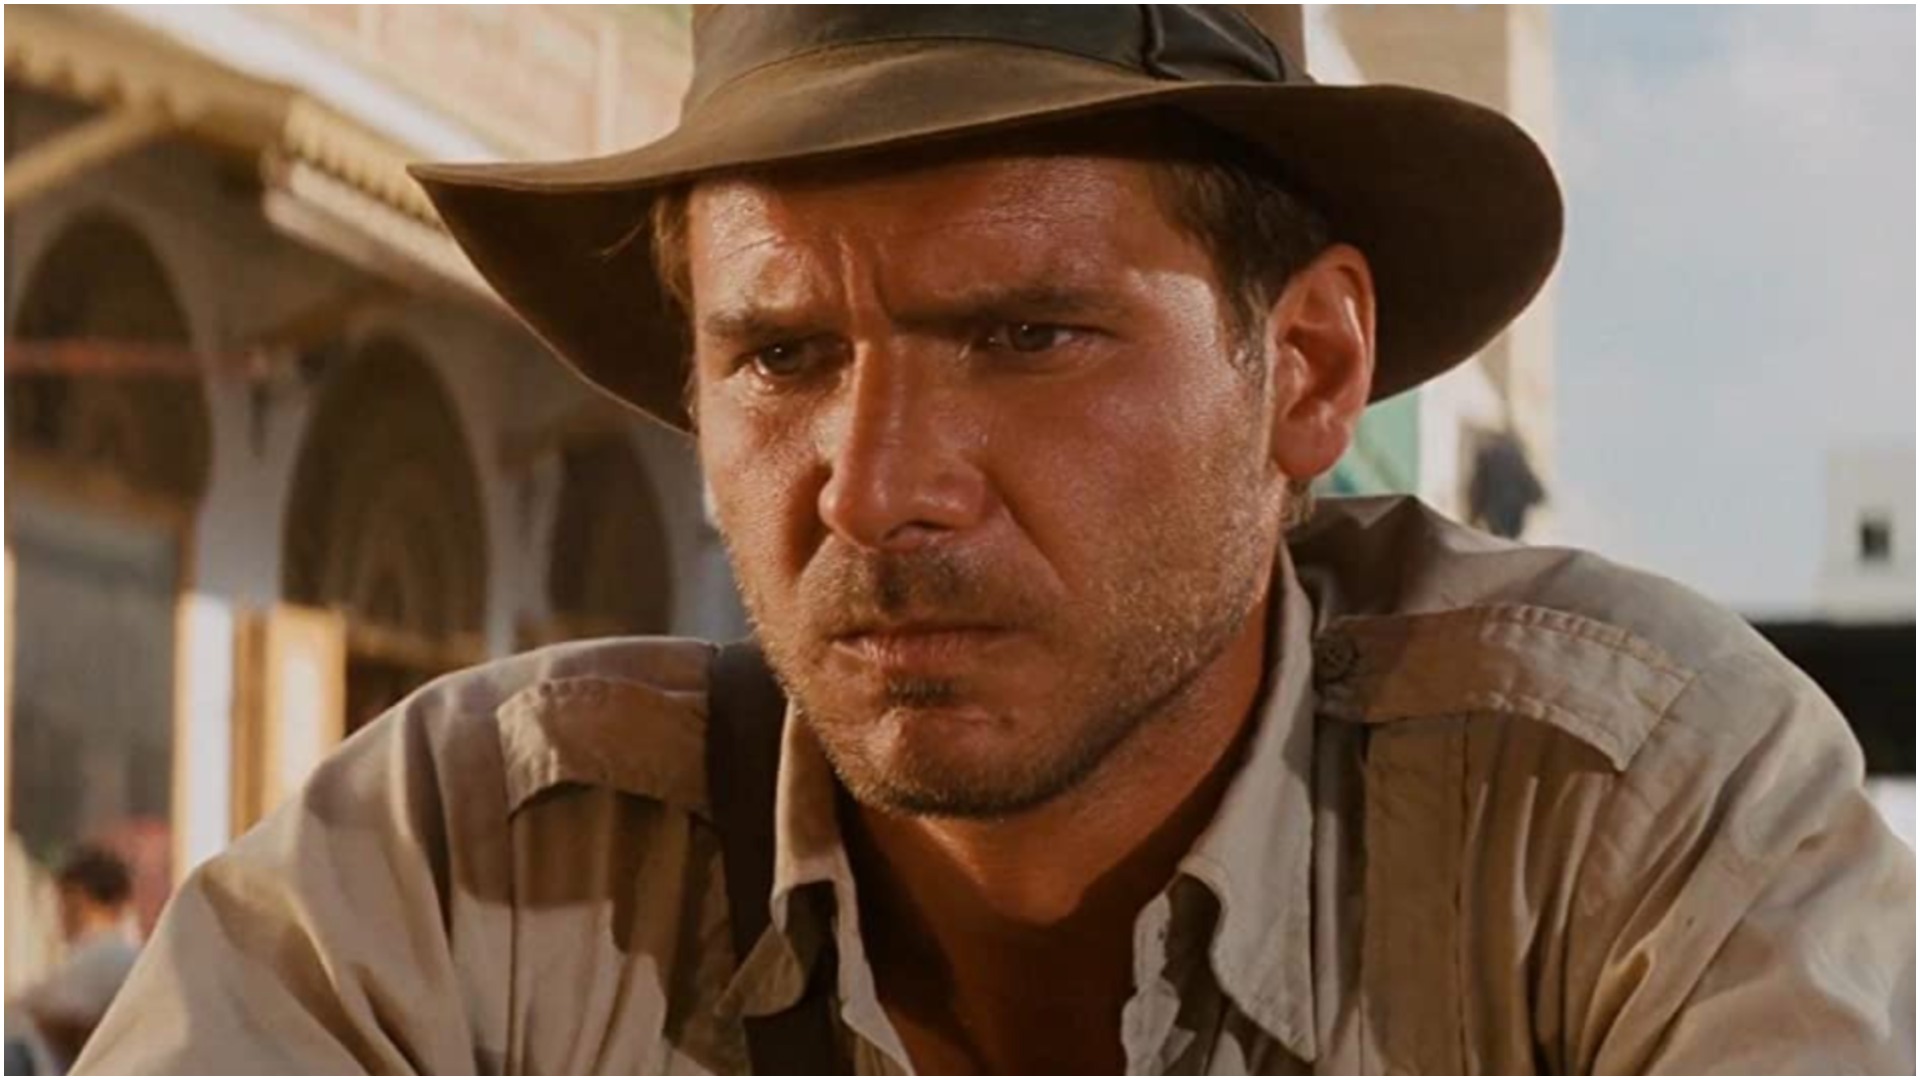 Indiana Jones 5 first look unveiled by Harrison Ford at Star Wars Celebration